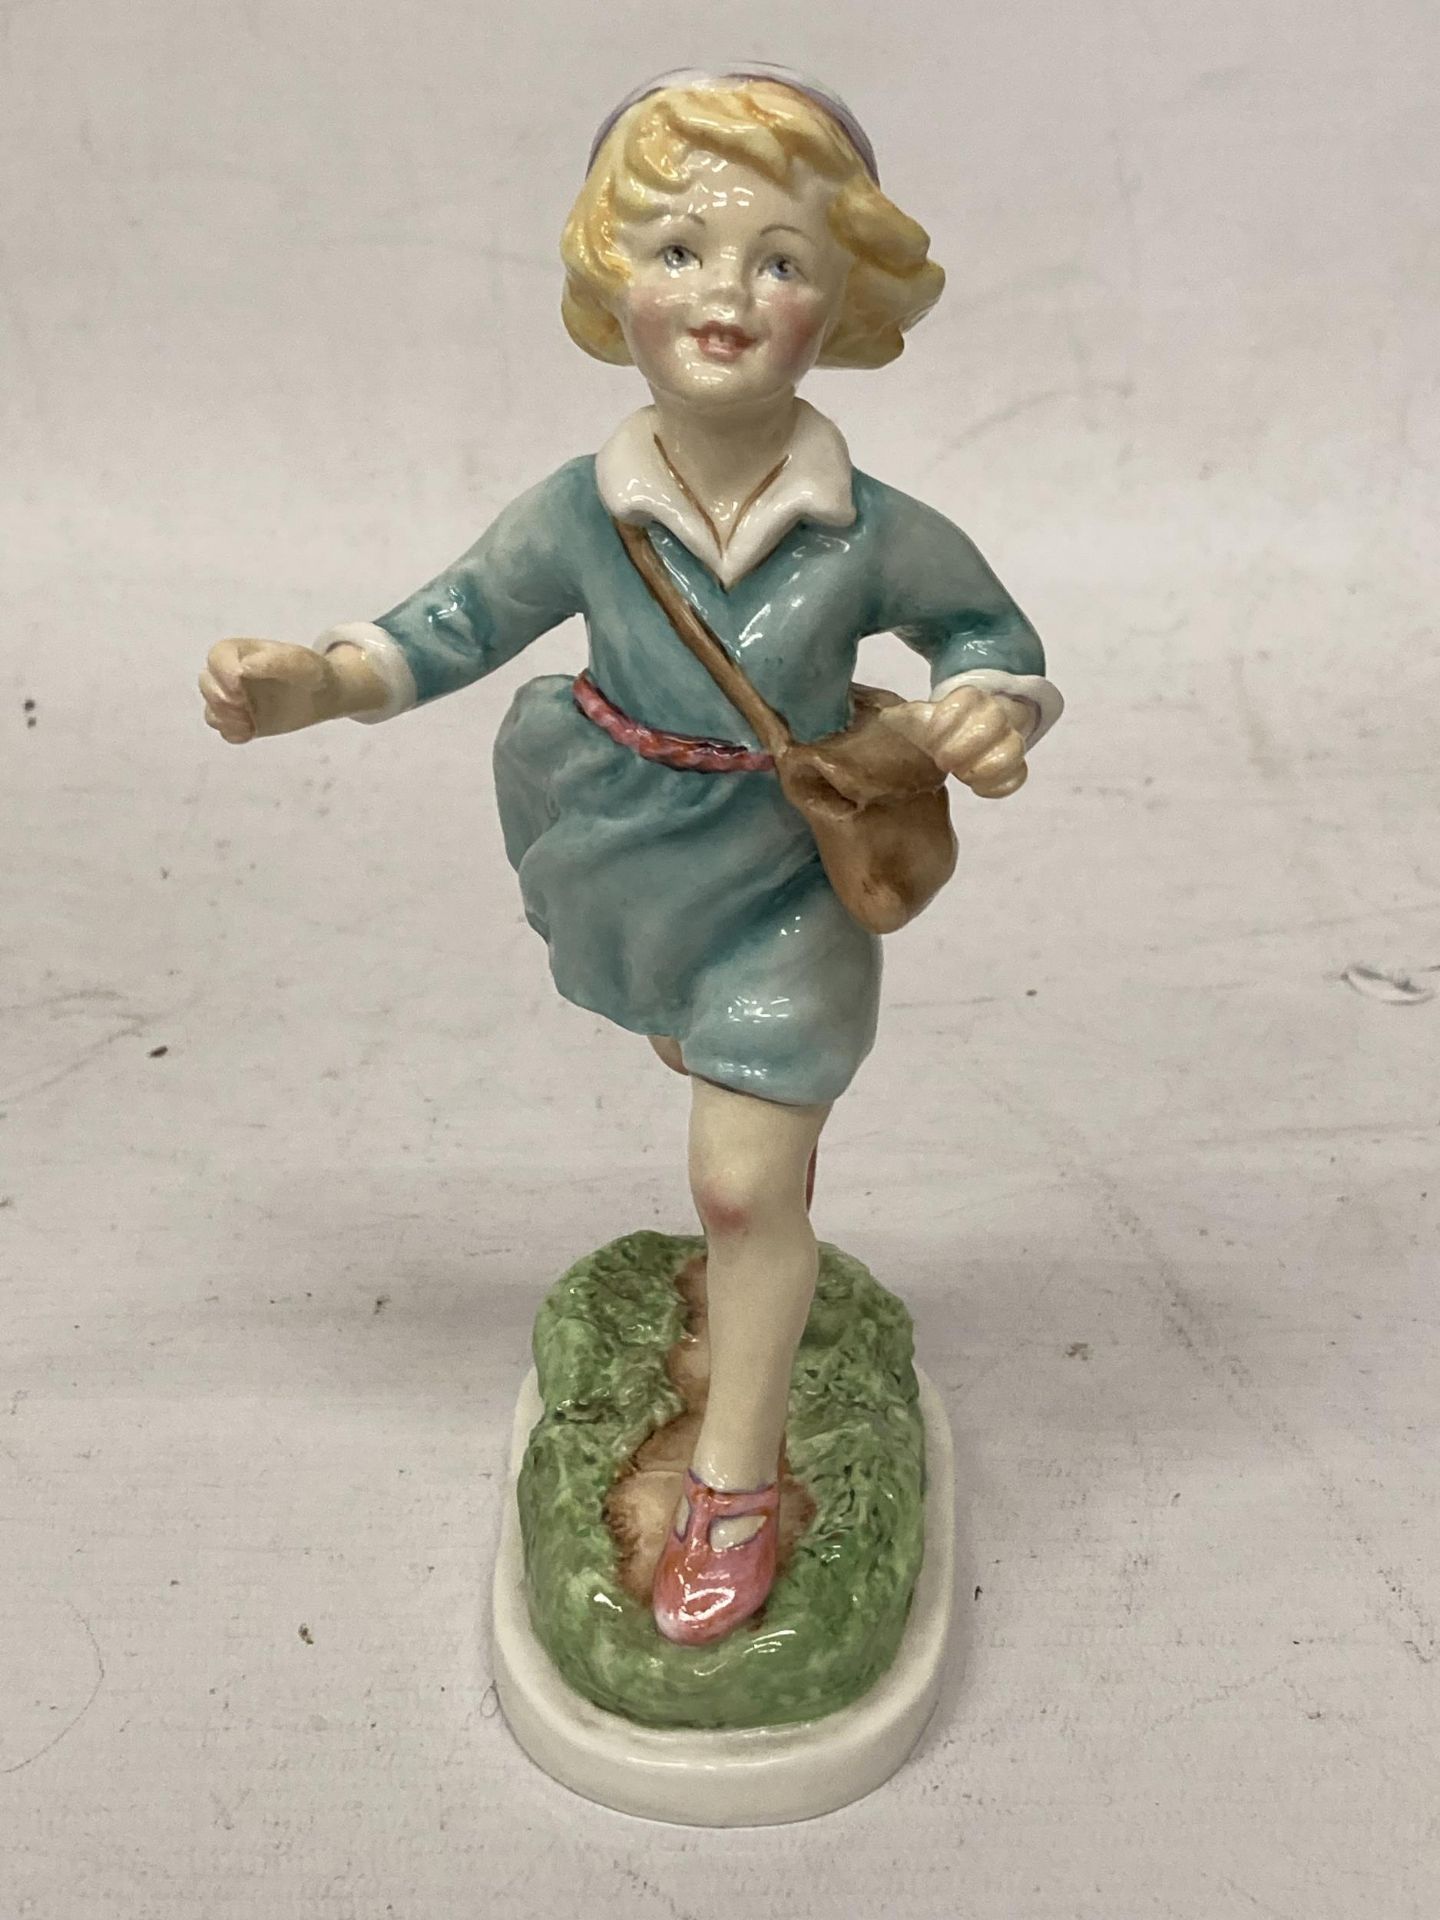 A ROYAL WORCESTER FIGURE "THURSDAY'S CHILD HAS FAR TO GO" 3522 - Image 2 of 5